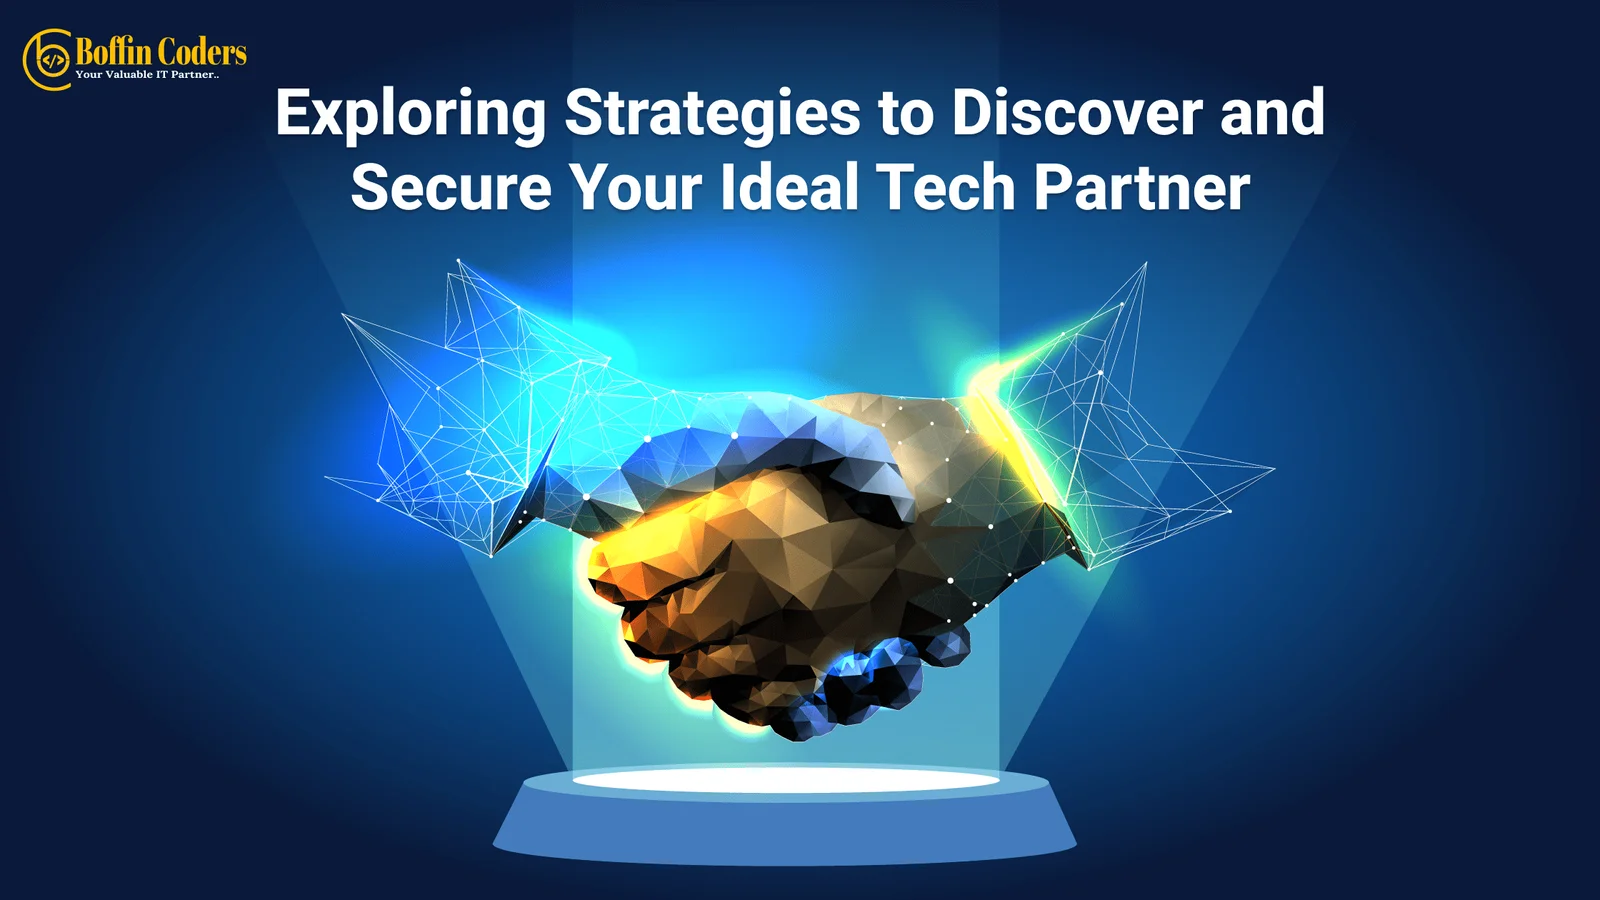 Exploring Strategies to Discover and Secure Your Ideal Tech Partner